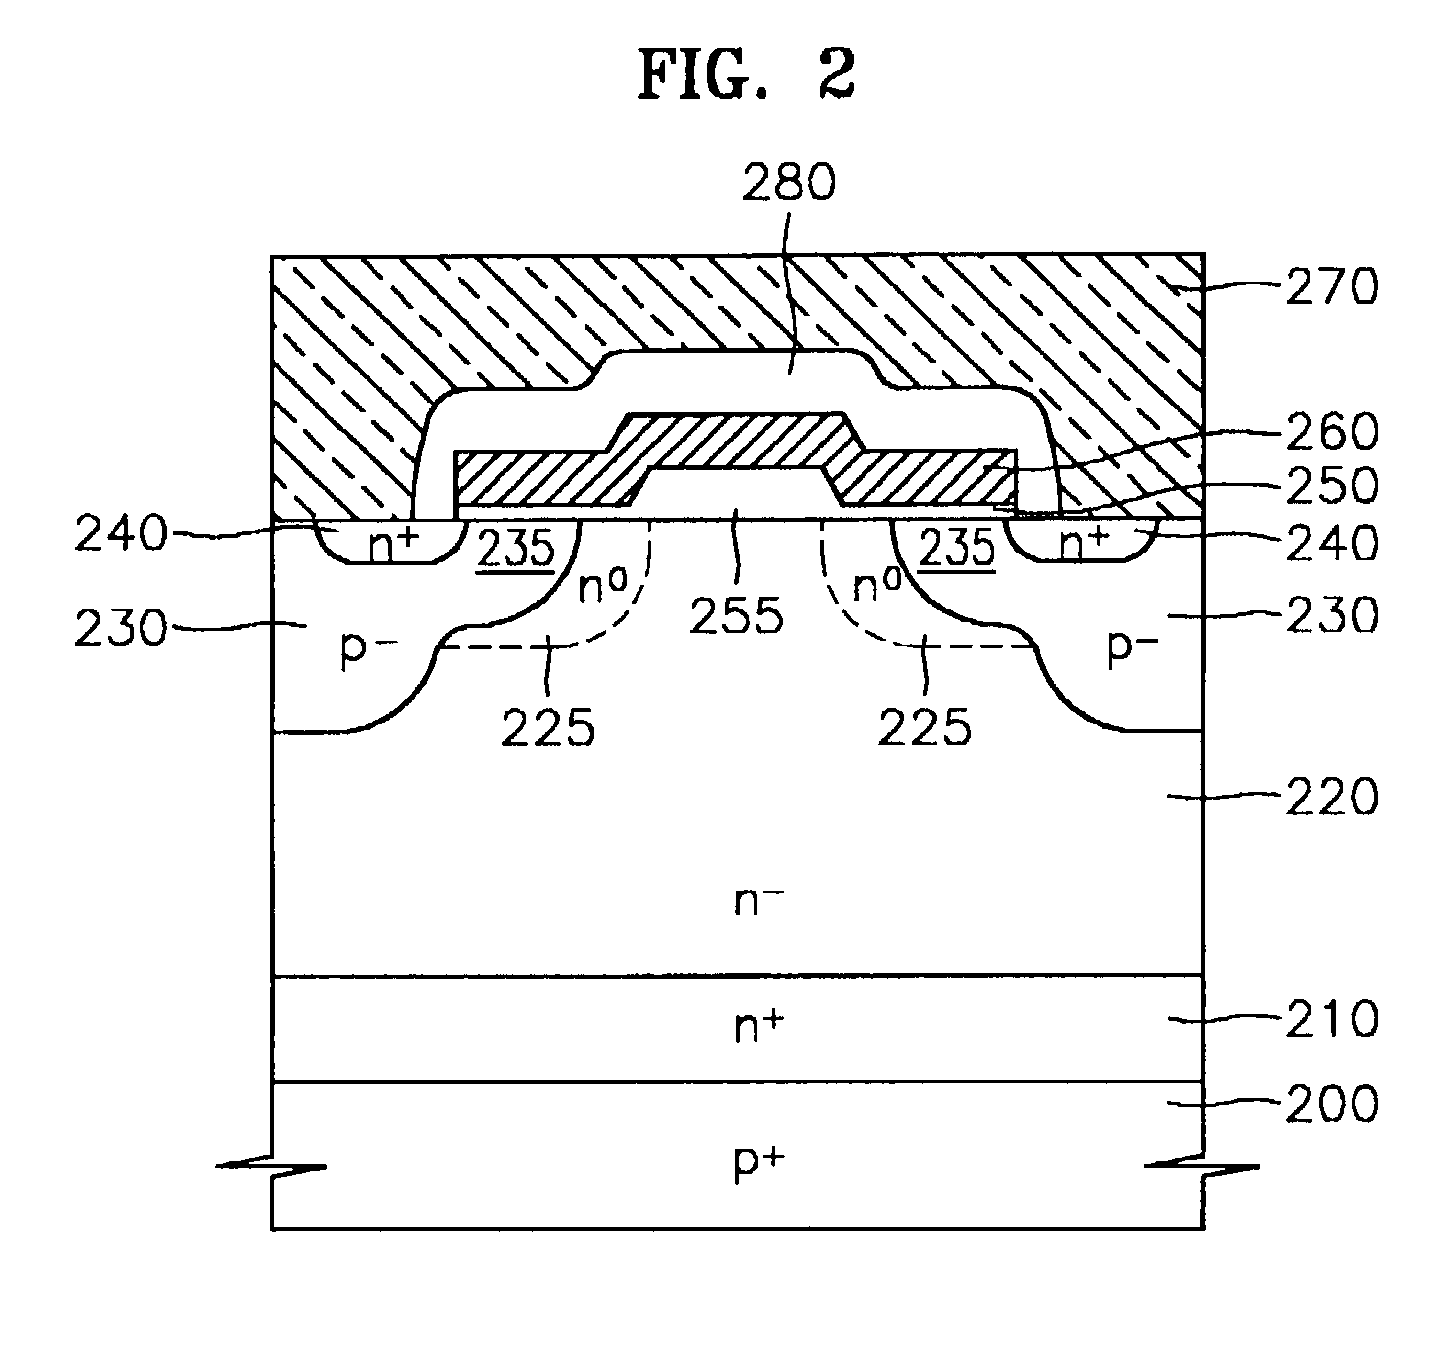 Mos-gated power semiconductor device